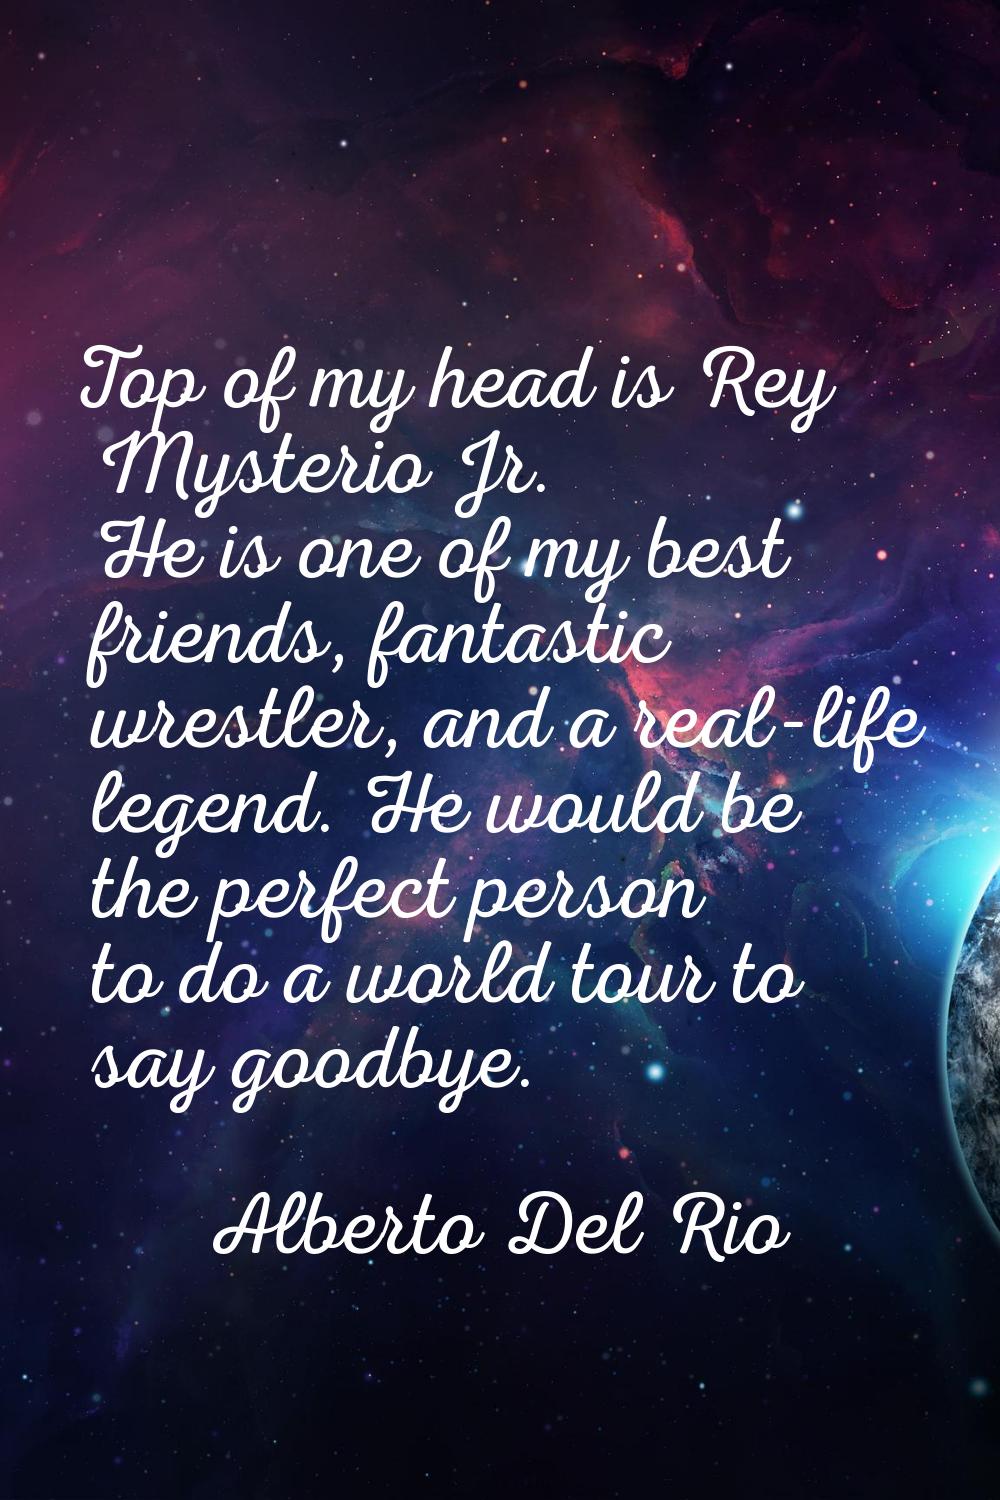 Top of my head is Rey Mysterio Jr. He is one of my best friends, fantastic wrestler, and a real-lif